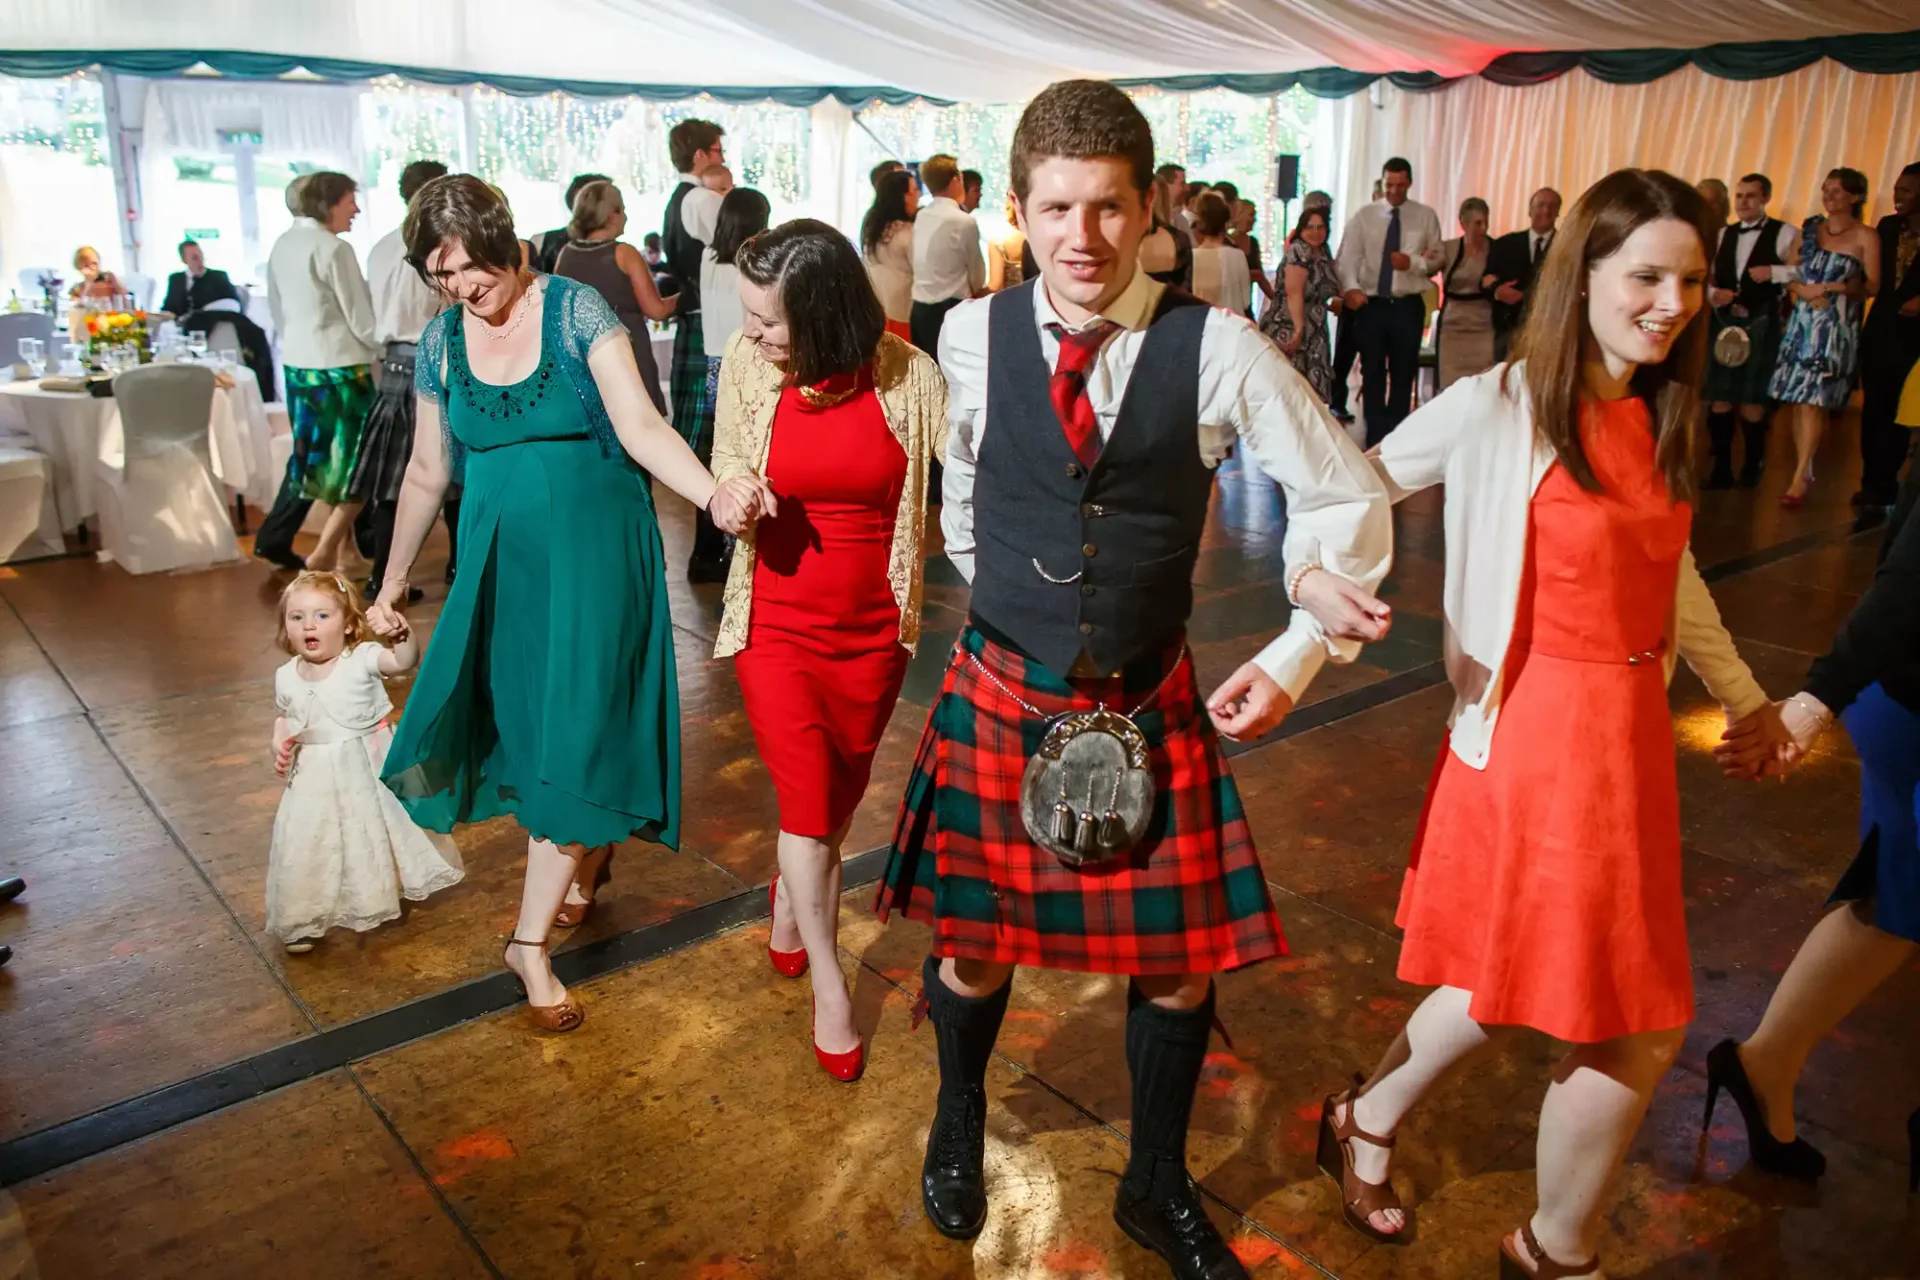 Group of people dancing at a wedding reception, including a man in a kilt and a little girl in a white dress.